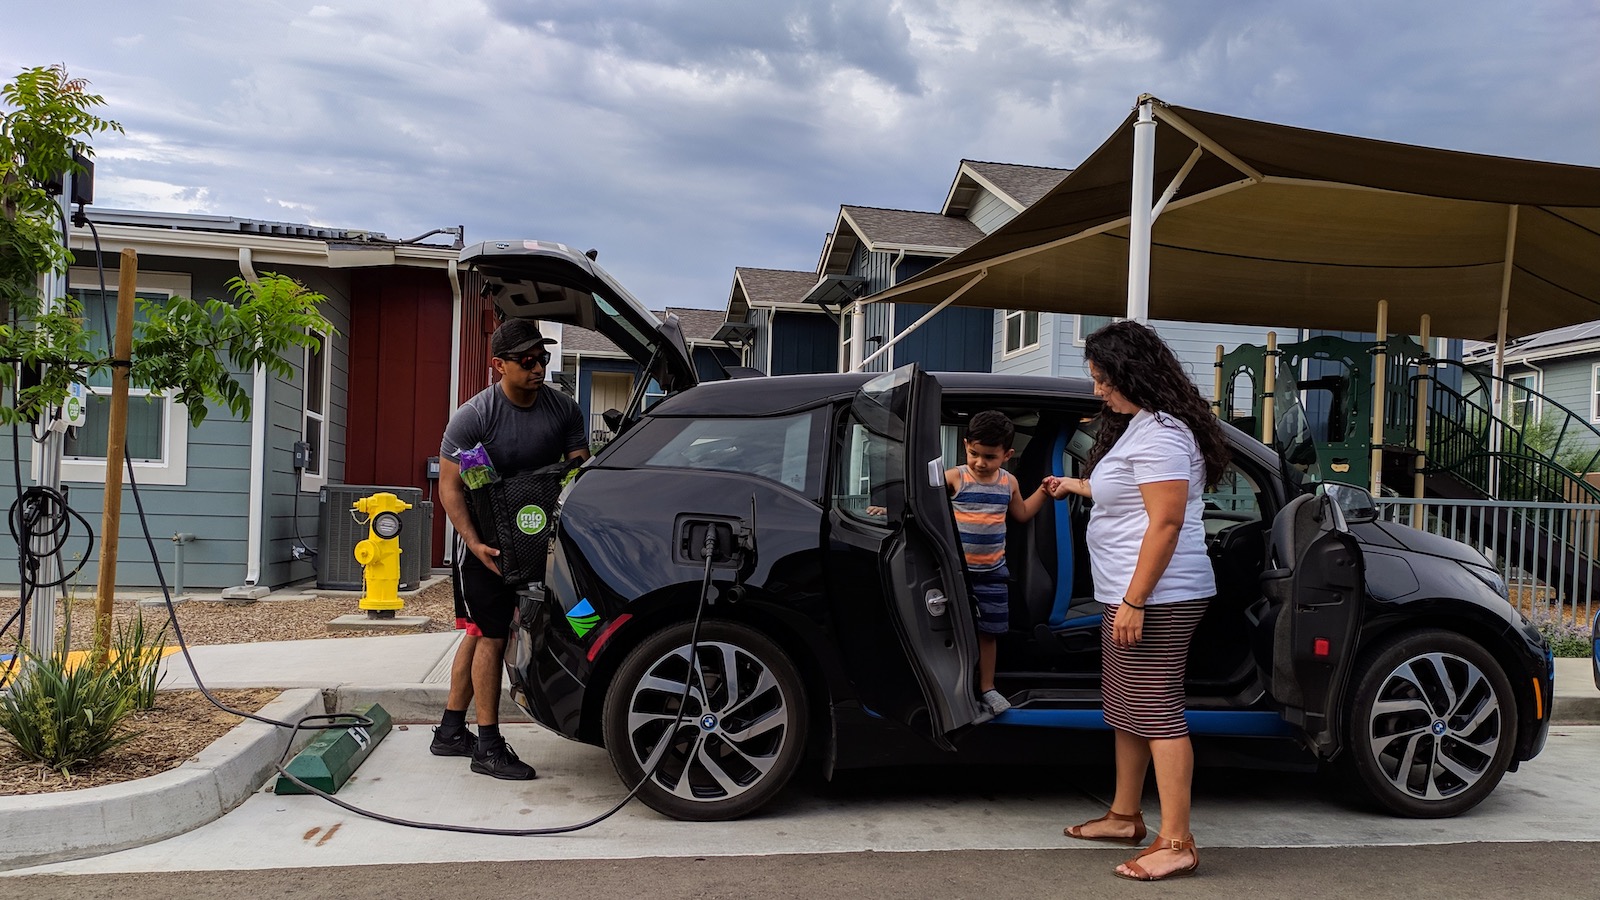 A family of three three is shown unloading groceries in a small BMW electric car plugged in outside their home.